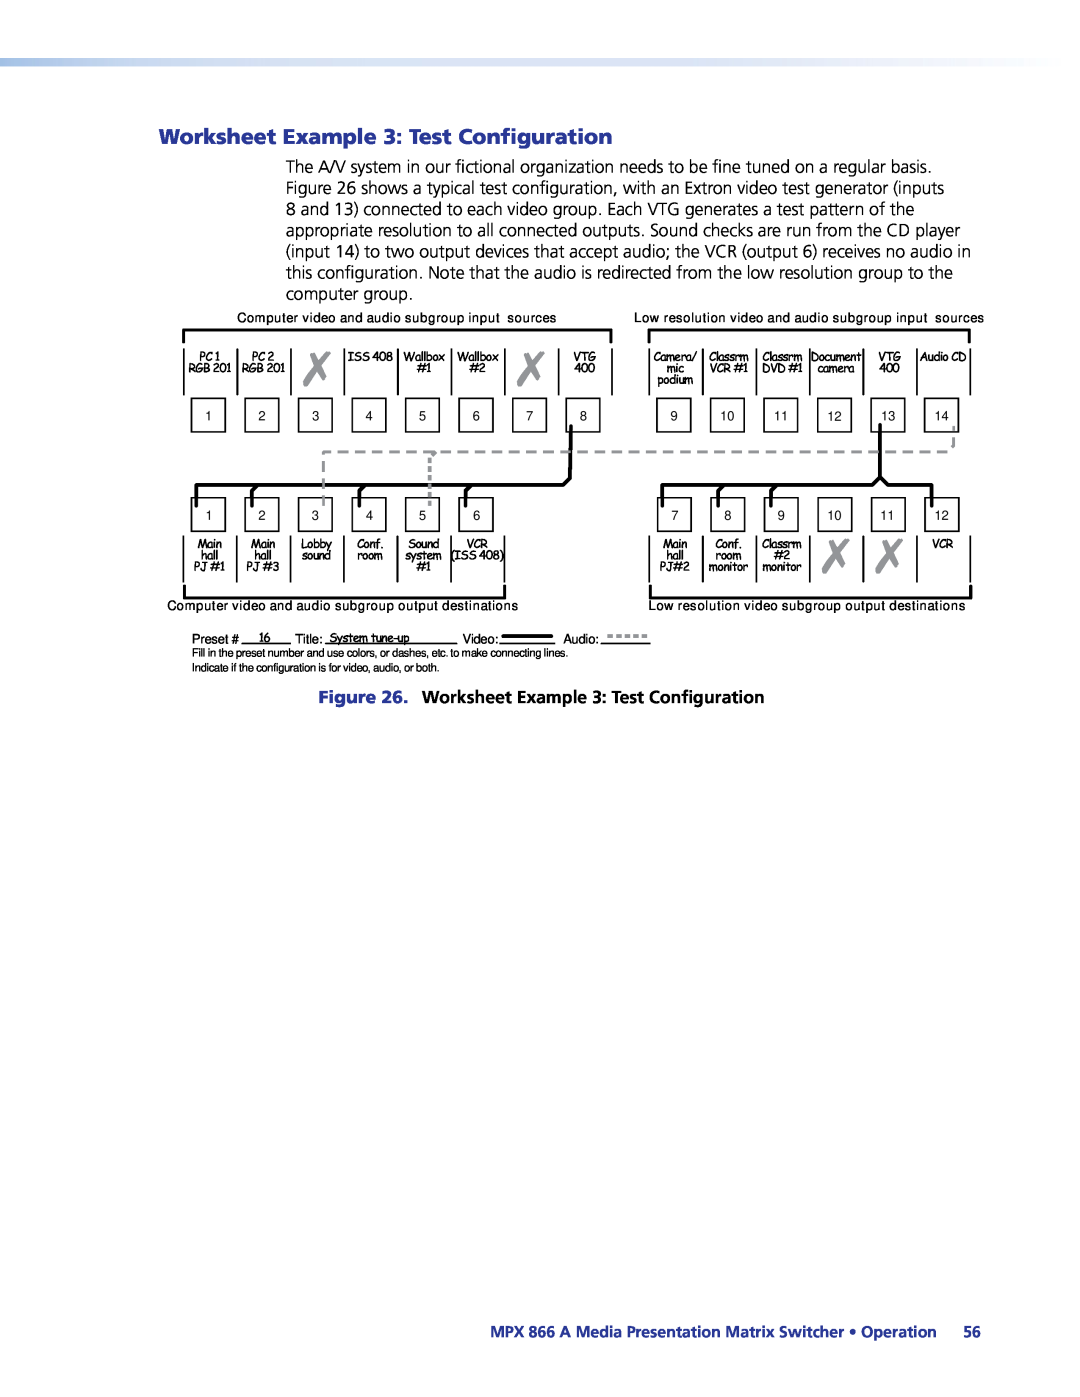 Extron electronic MPX 866 A manual Worksheet Example 3 Test Configuration 